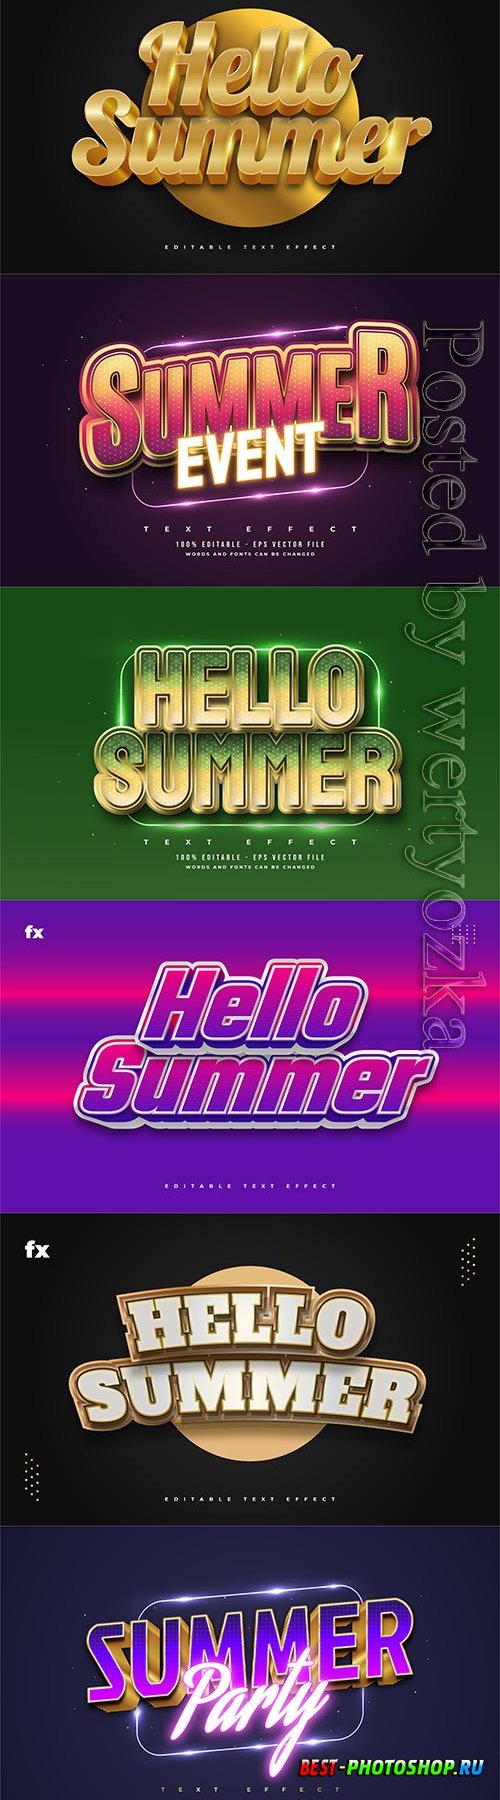 Hello summer 3d editable text style effect in vector vol 6